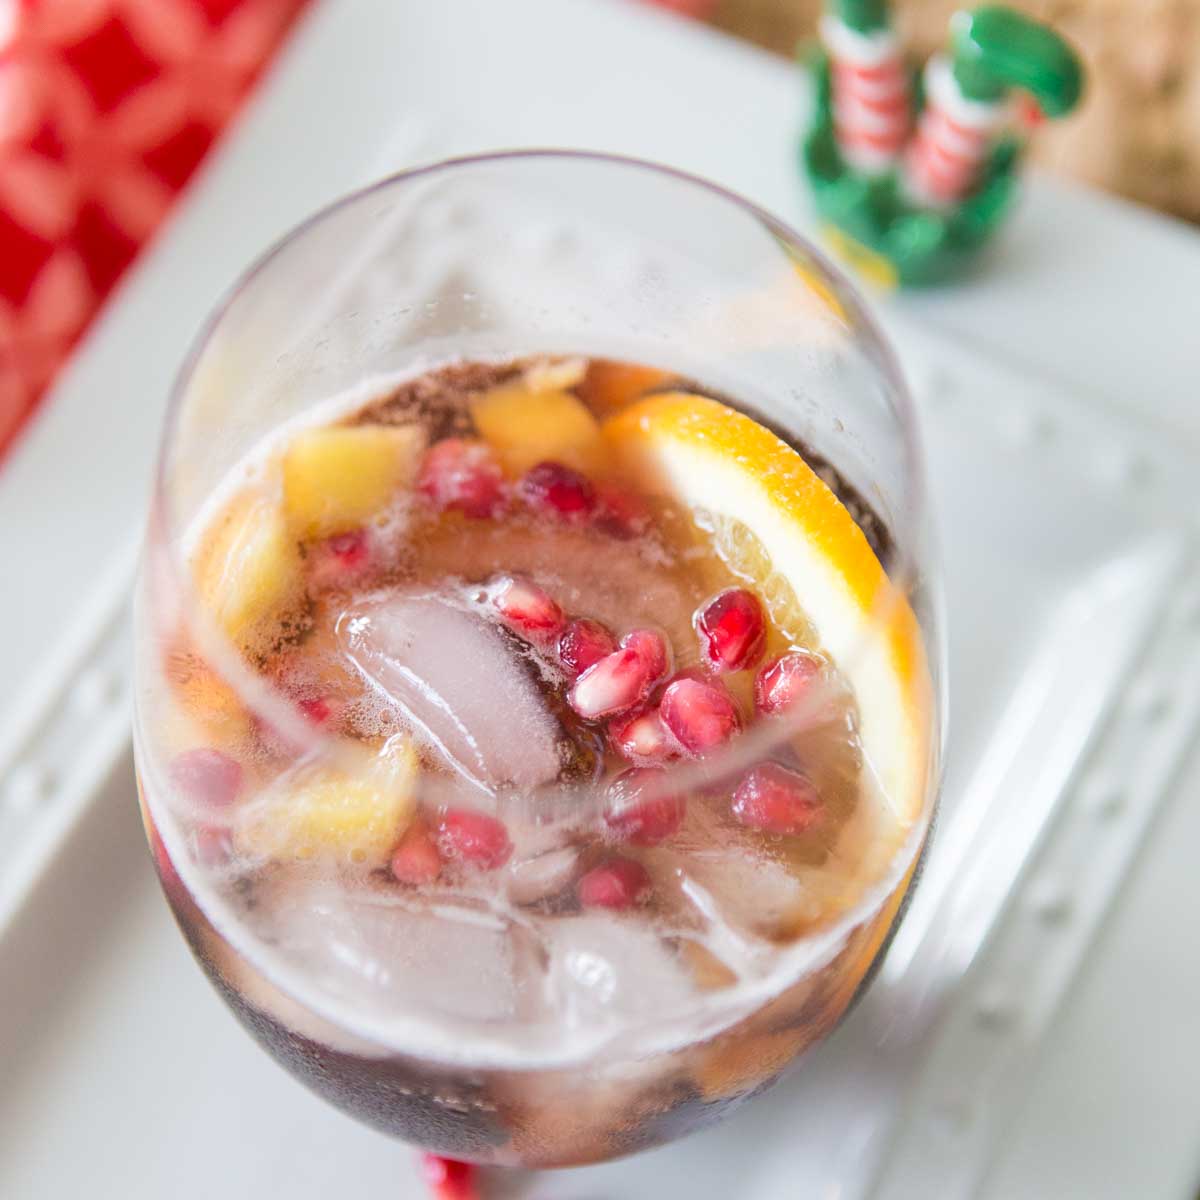 A stemless wine glass is filled with pomegranate punch, slices of fresh orange, and fresh pomegranate seeds for garnish.